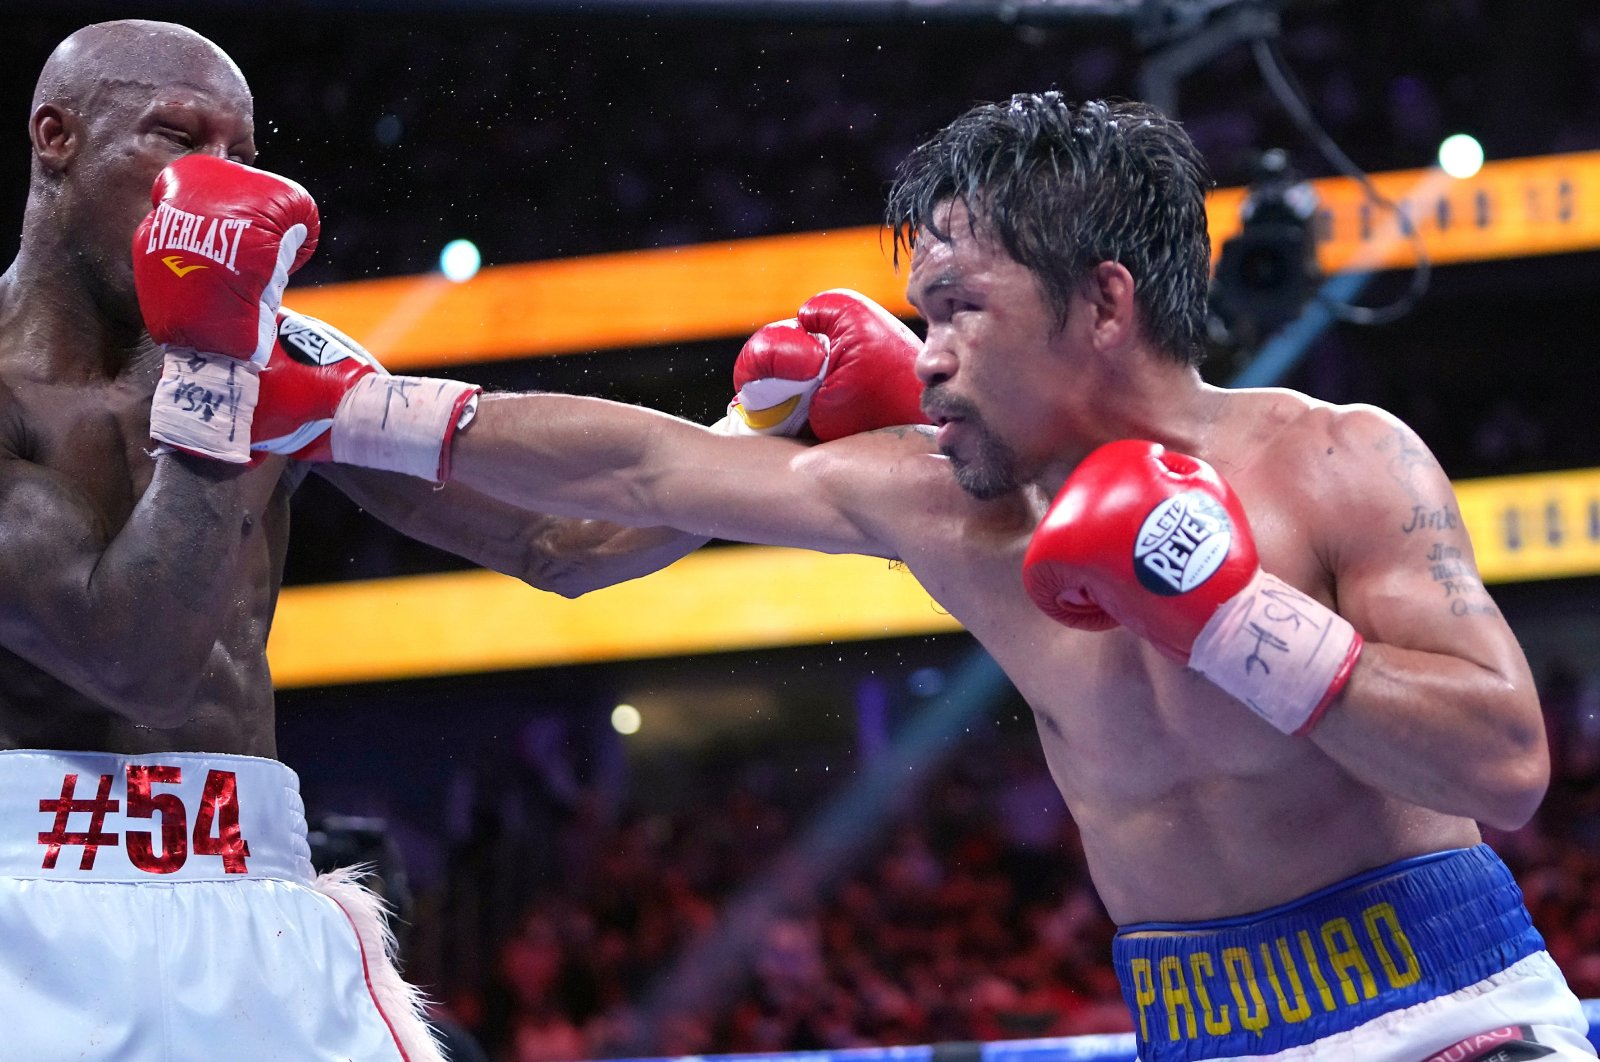 Manny Pacquiao (R) fights Yordenis Ugasin a world welterweight championship bout at T-Mobile Arena, Las Vegas, Nevada, U.S., Aug. 21, 2021.  (USA TODAY Sports Photo via AP)